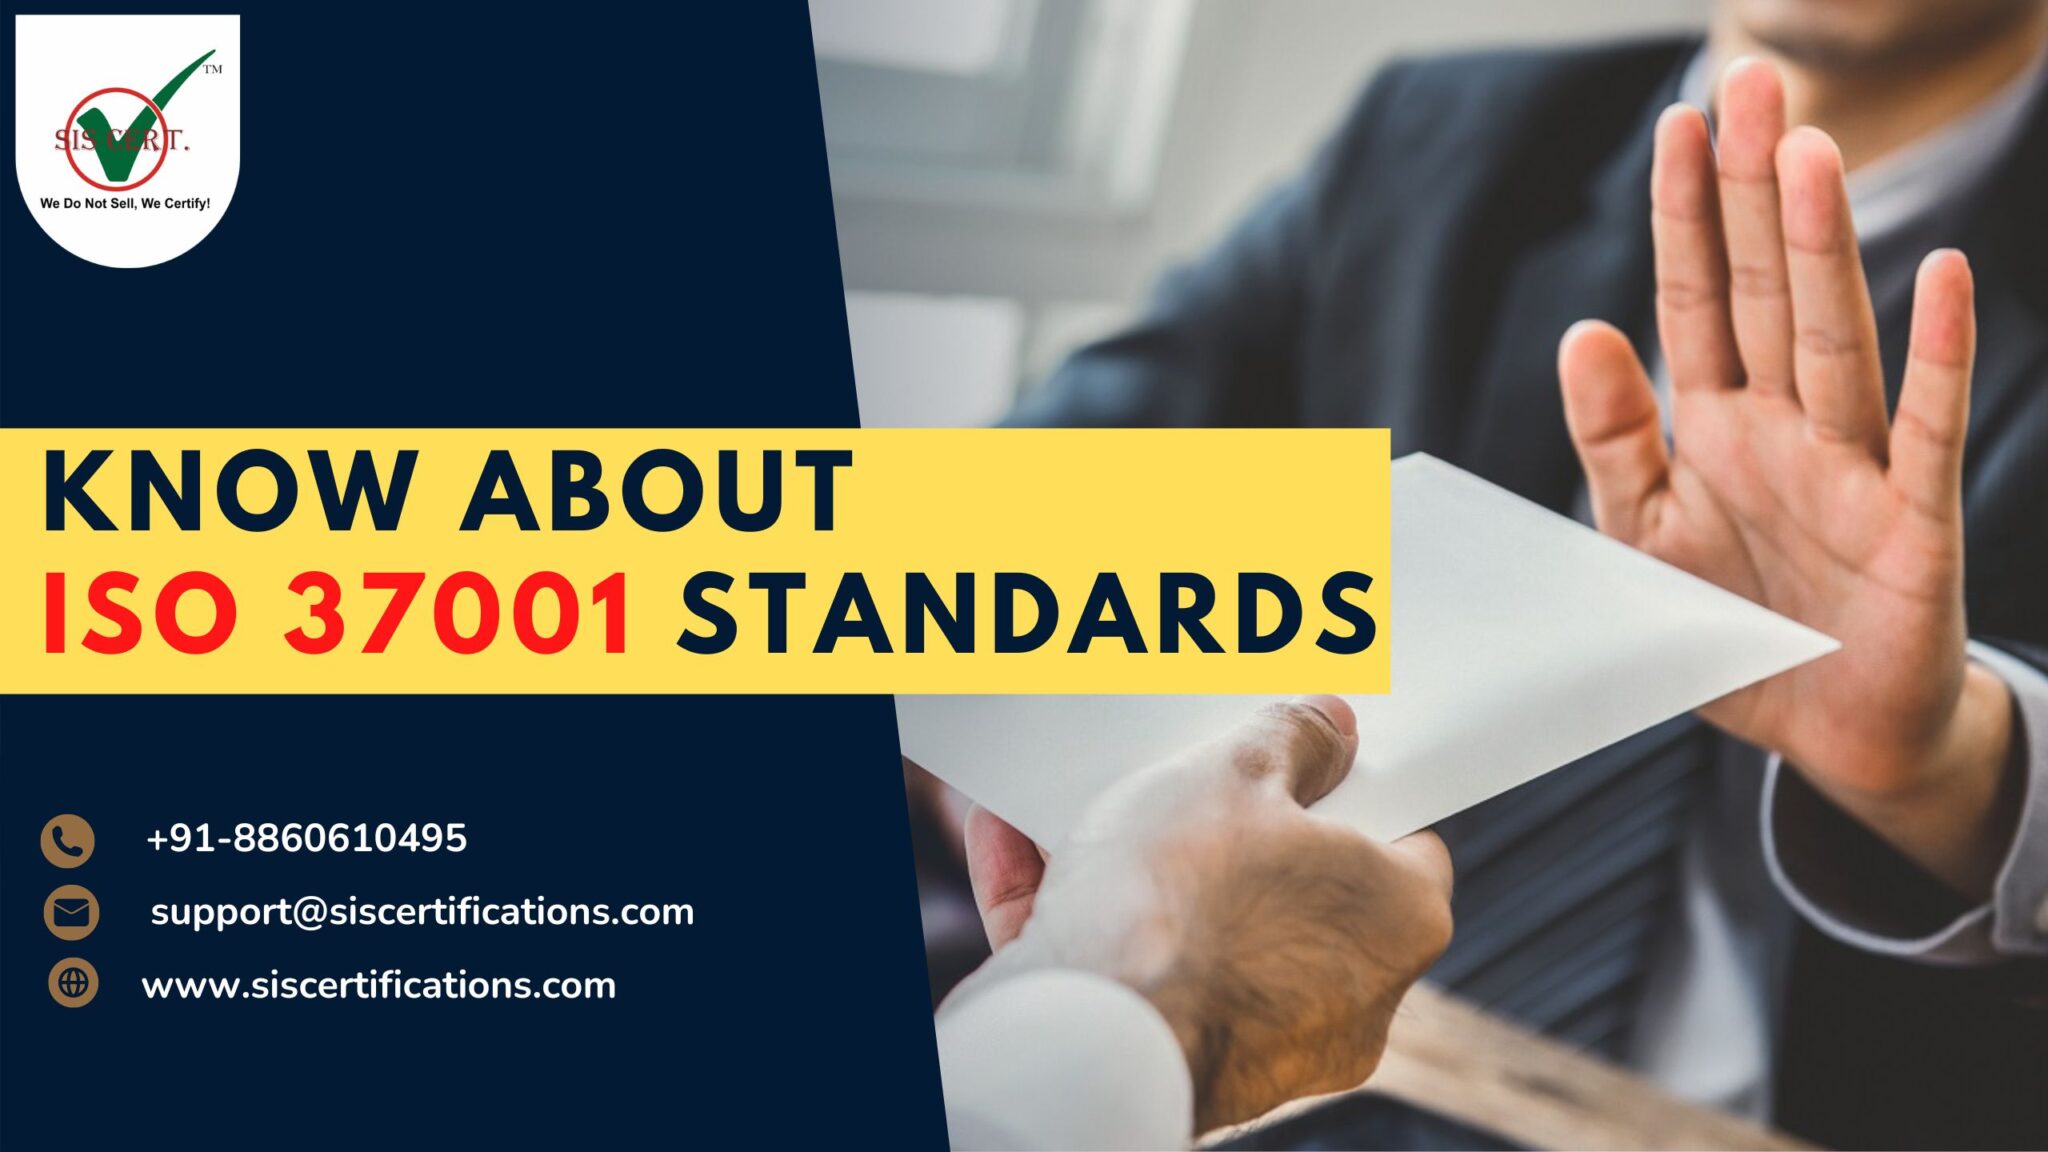 Know About ISO 37001 Standards